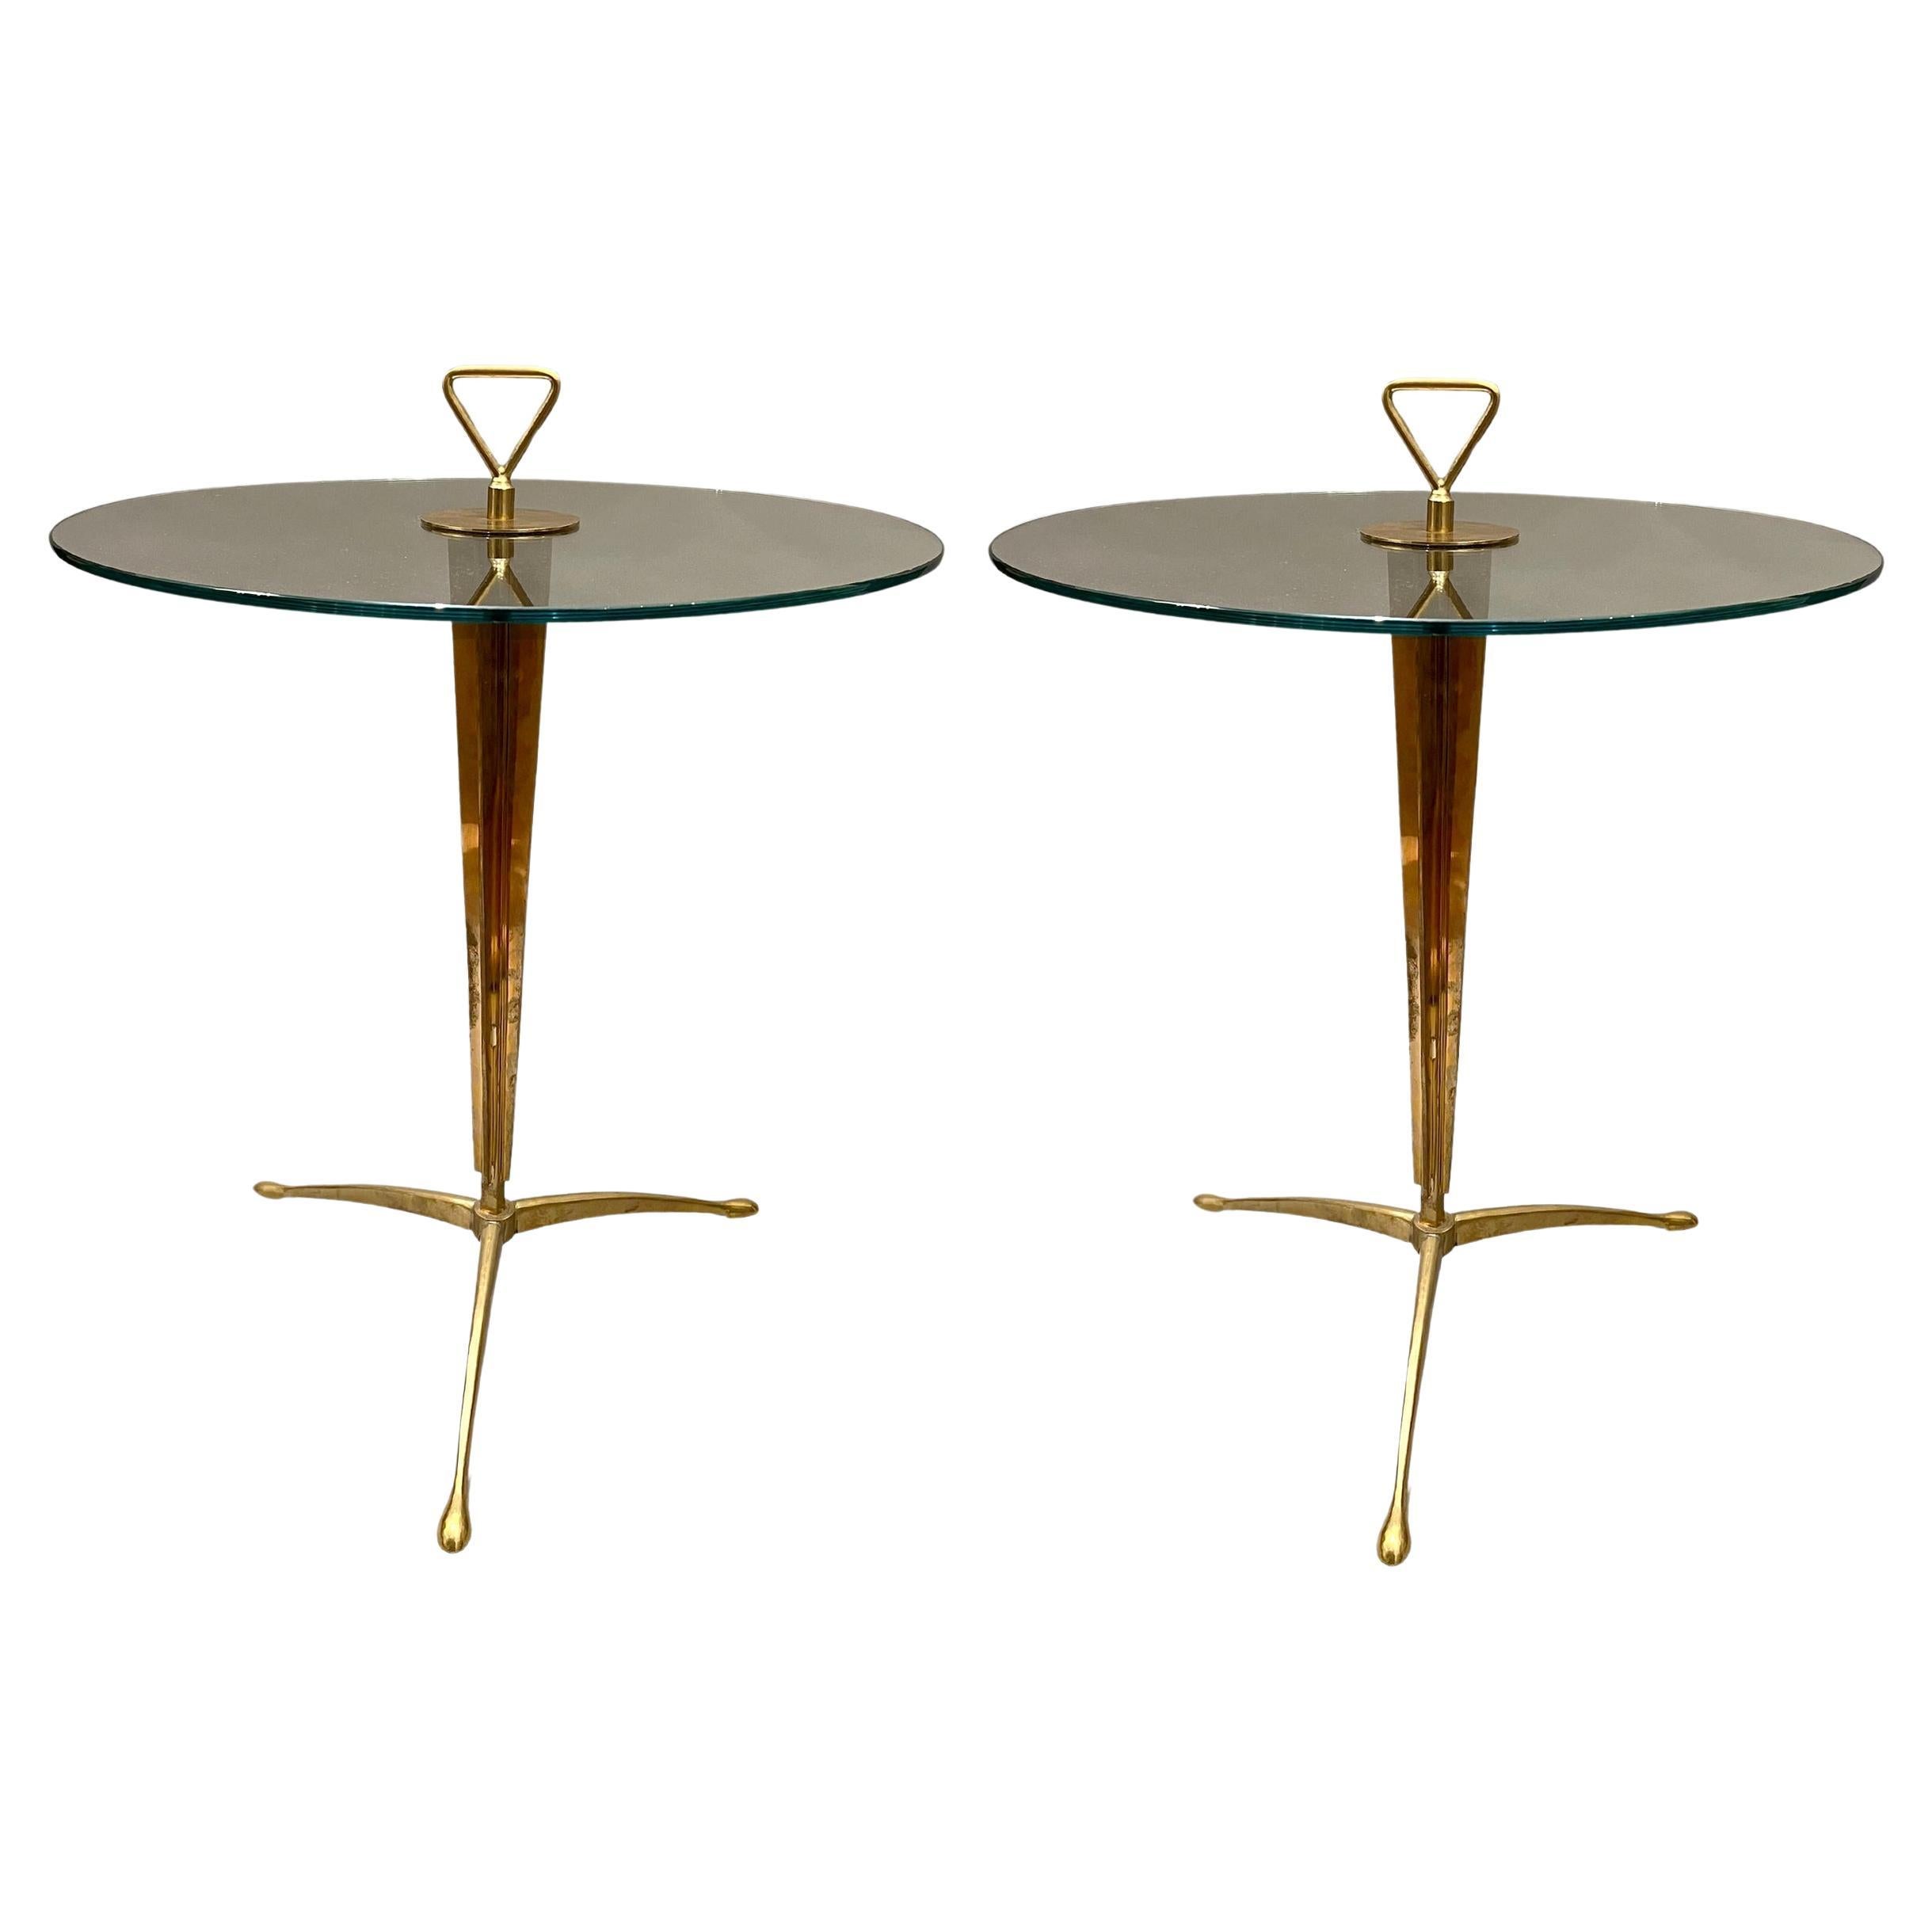 Pair of round glass and brass pedestal tables, Italy, circa 1970